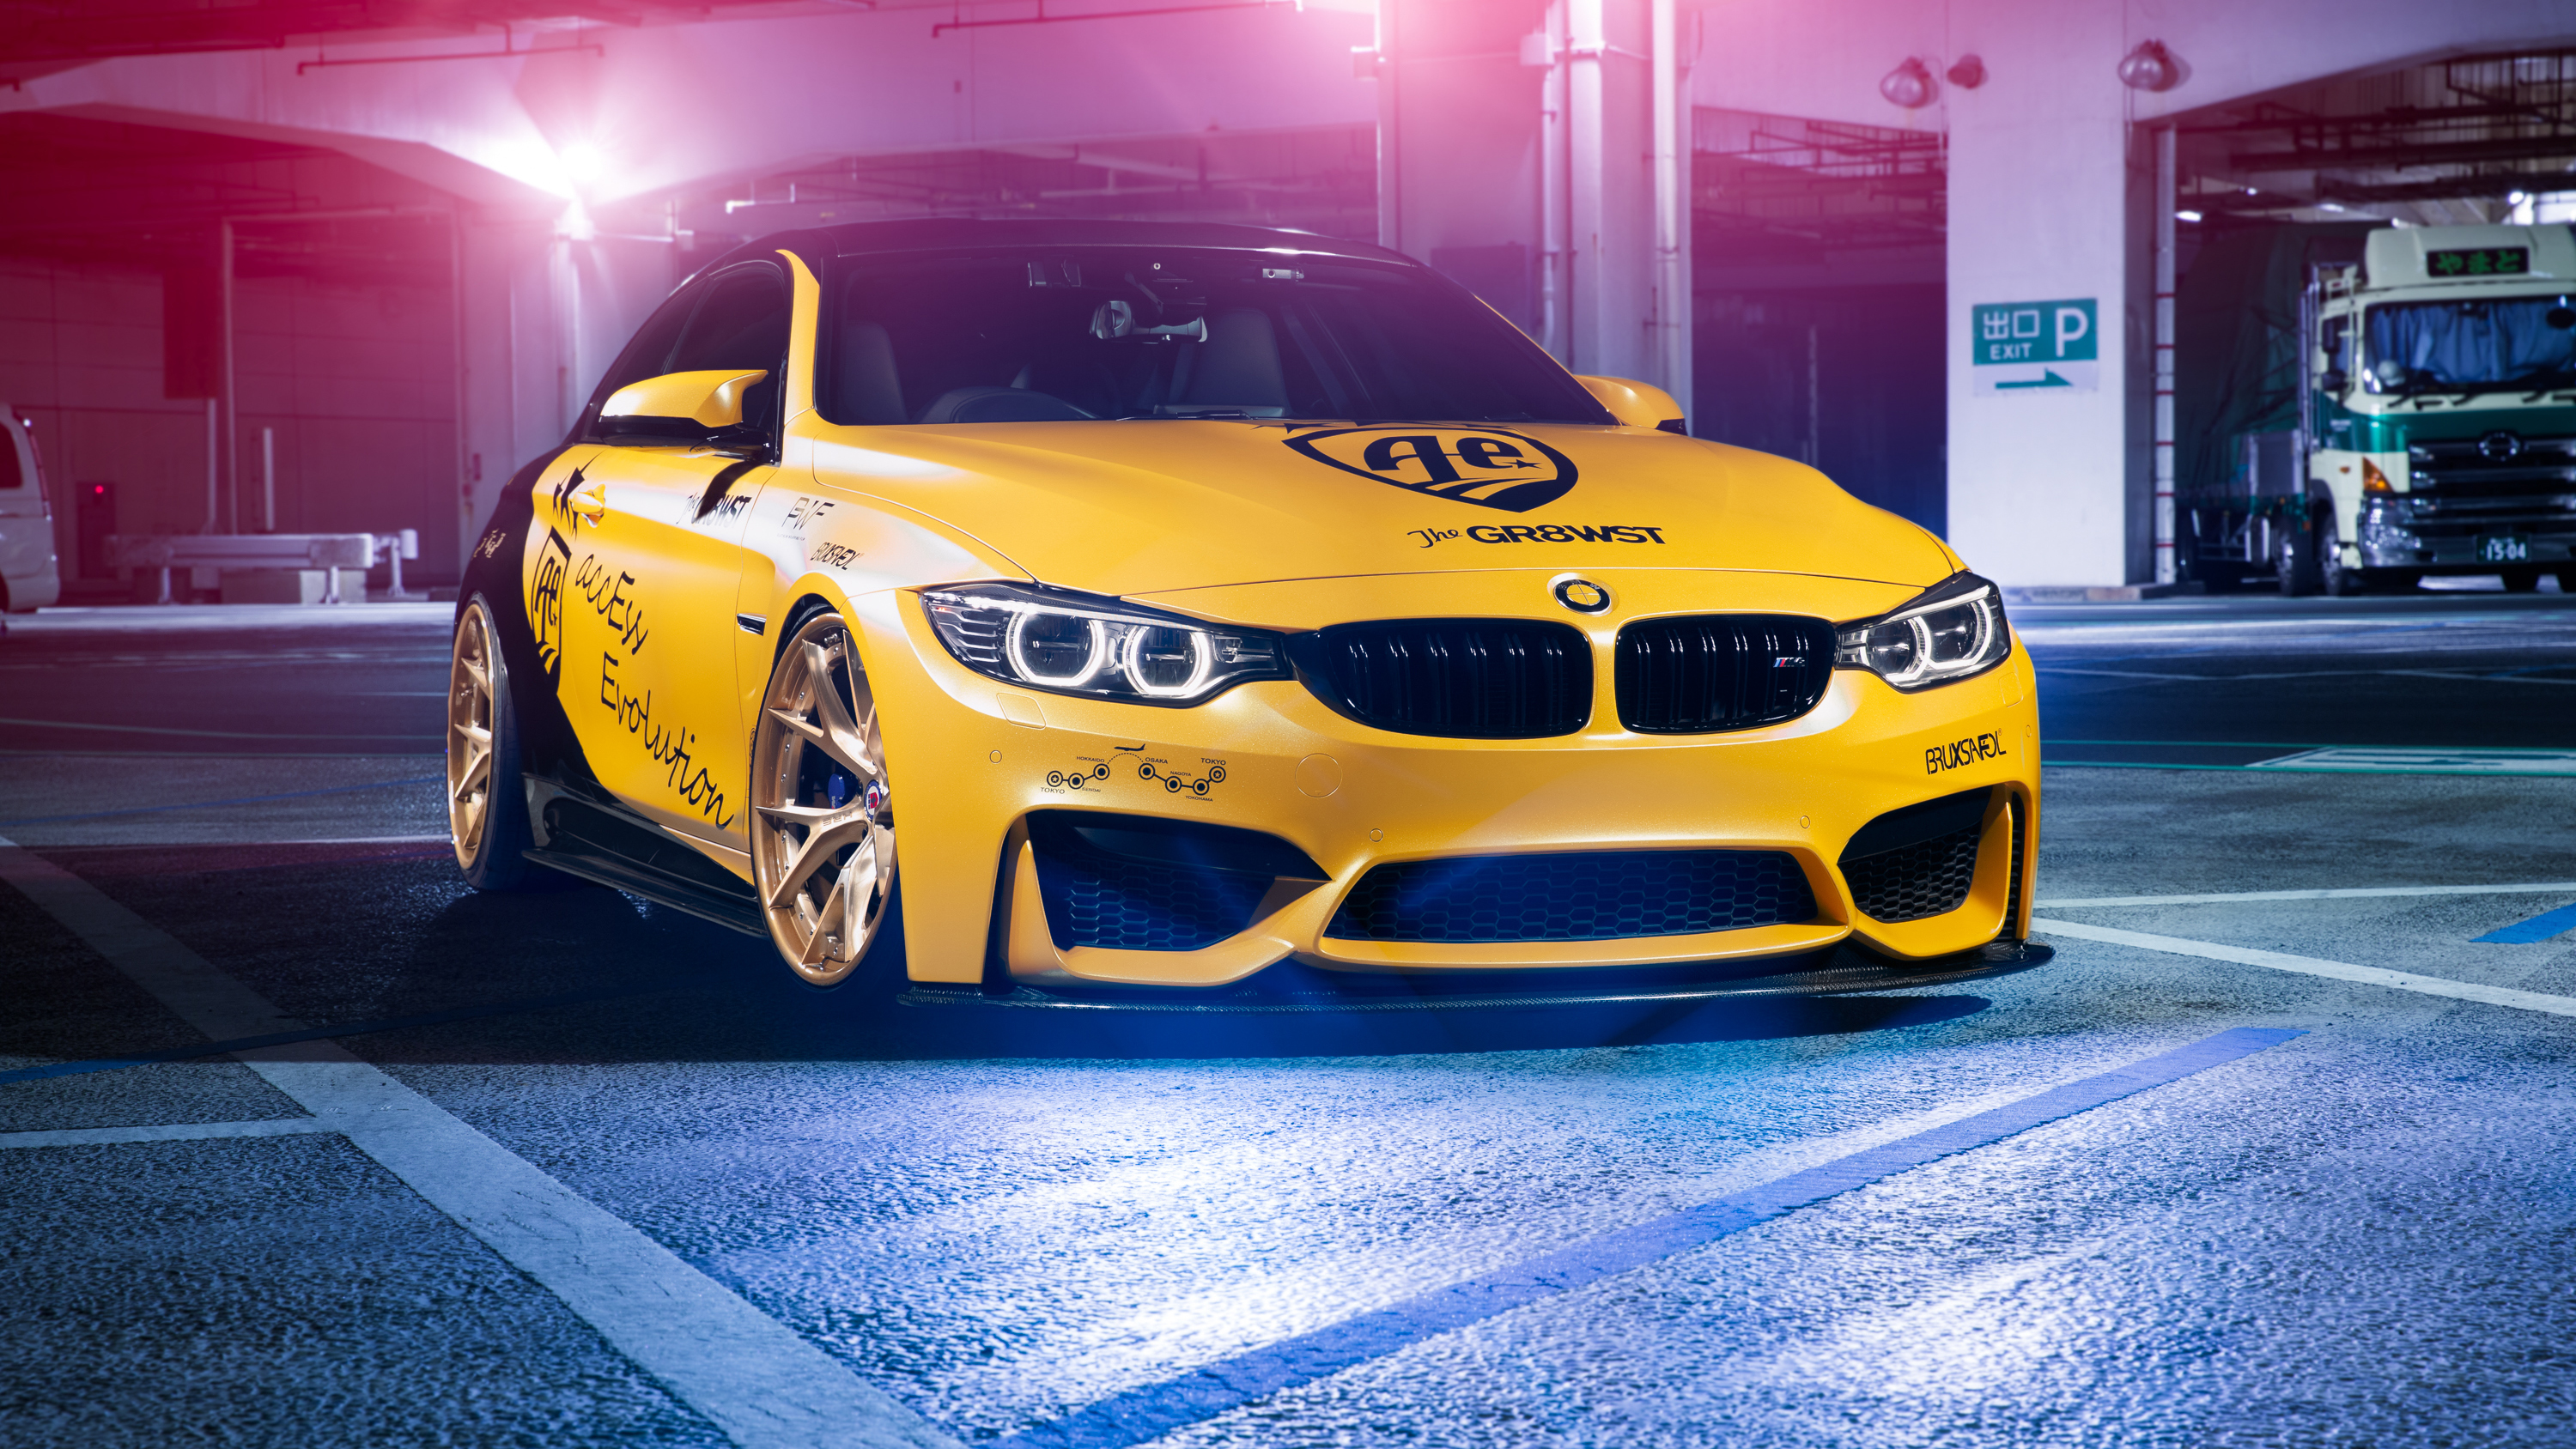 BMW M4 HRE Wheels Wallpapers